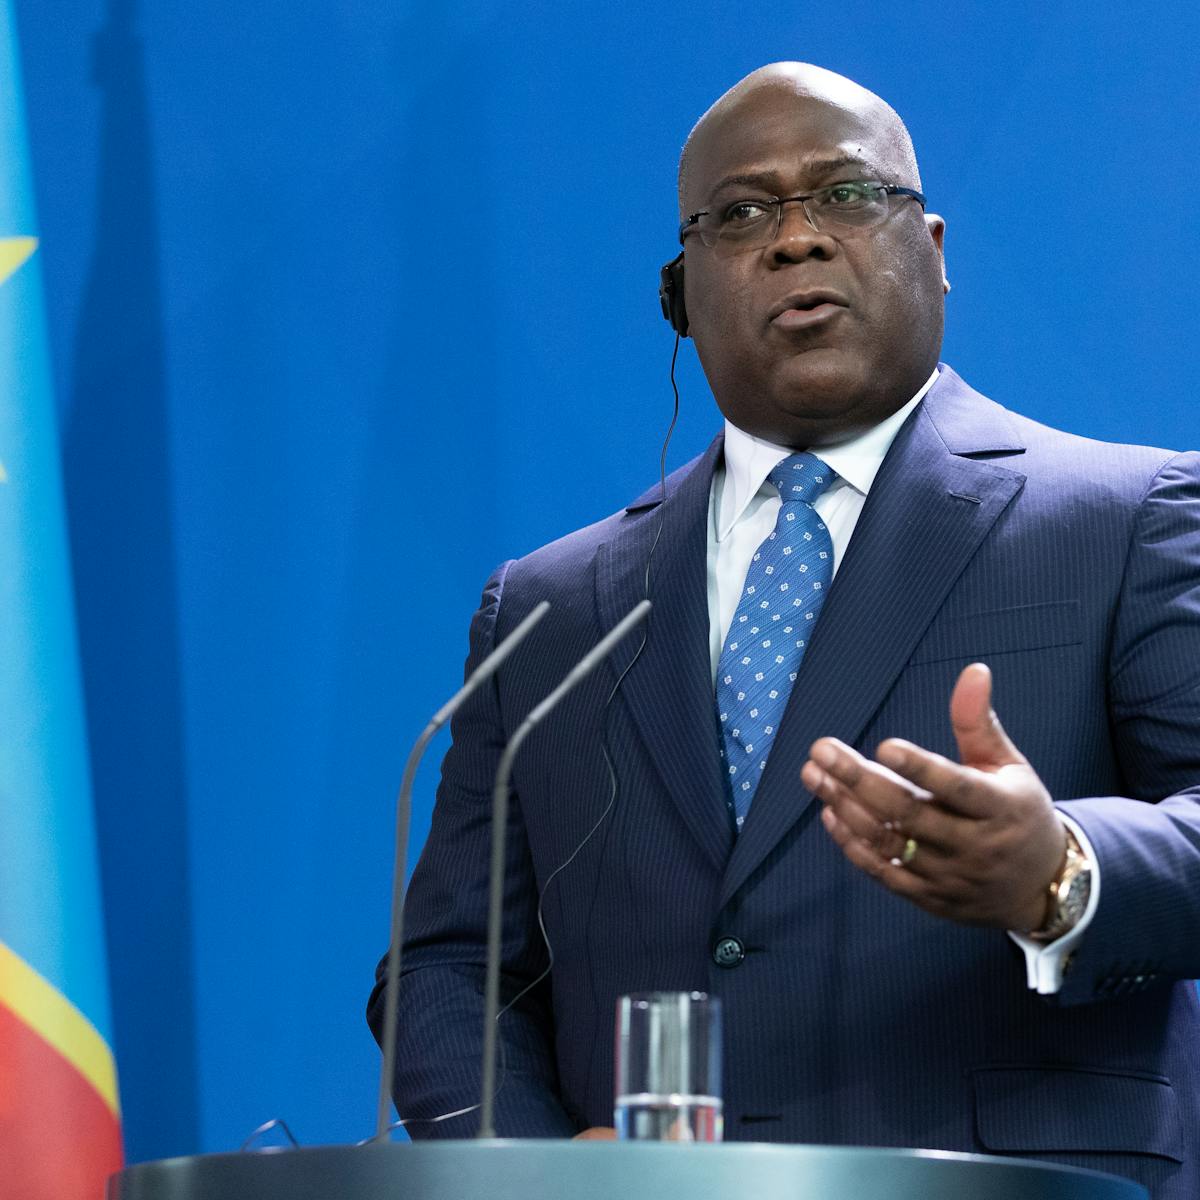 DRC's Tshisekedi has secured his power base: now it's time to deliver